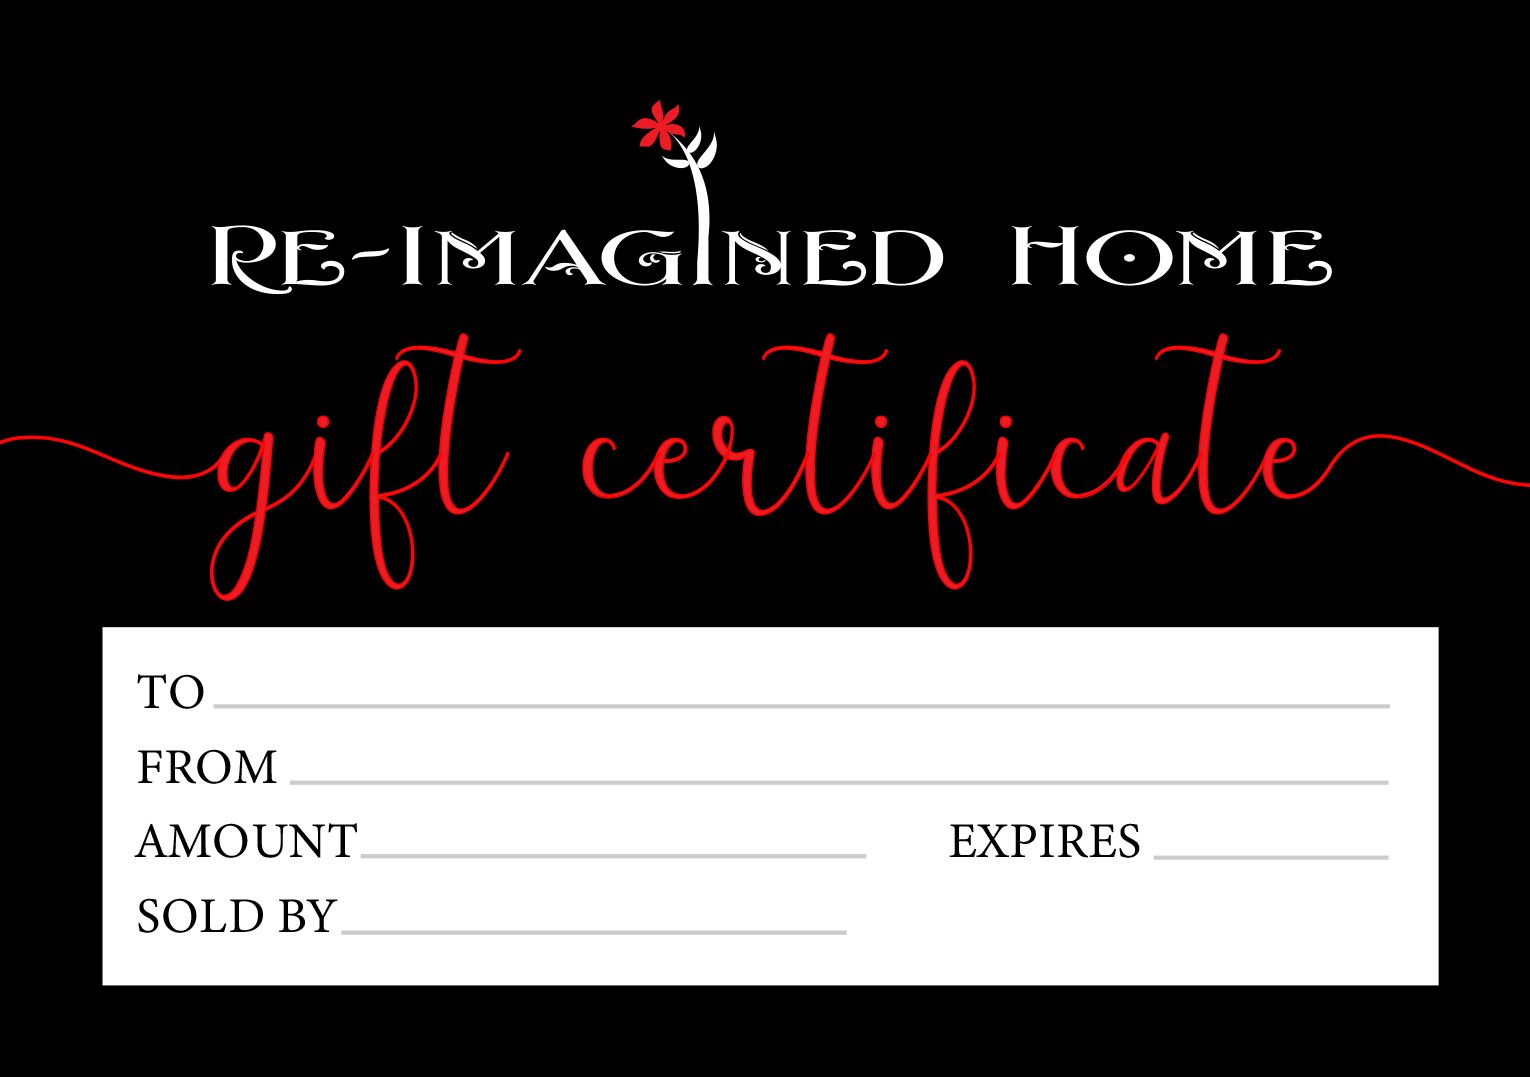 Re-Imagined Home $25 Gift Certificate Image